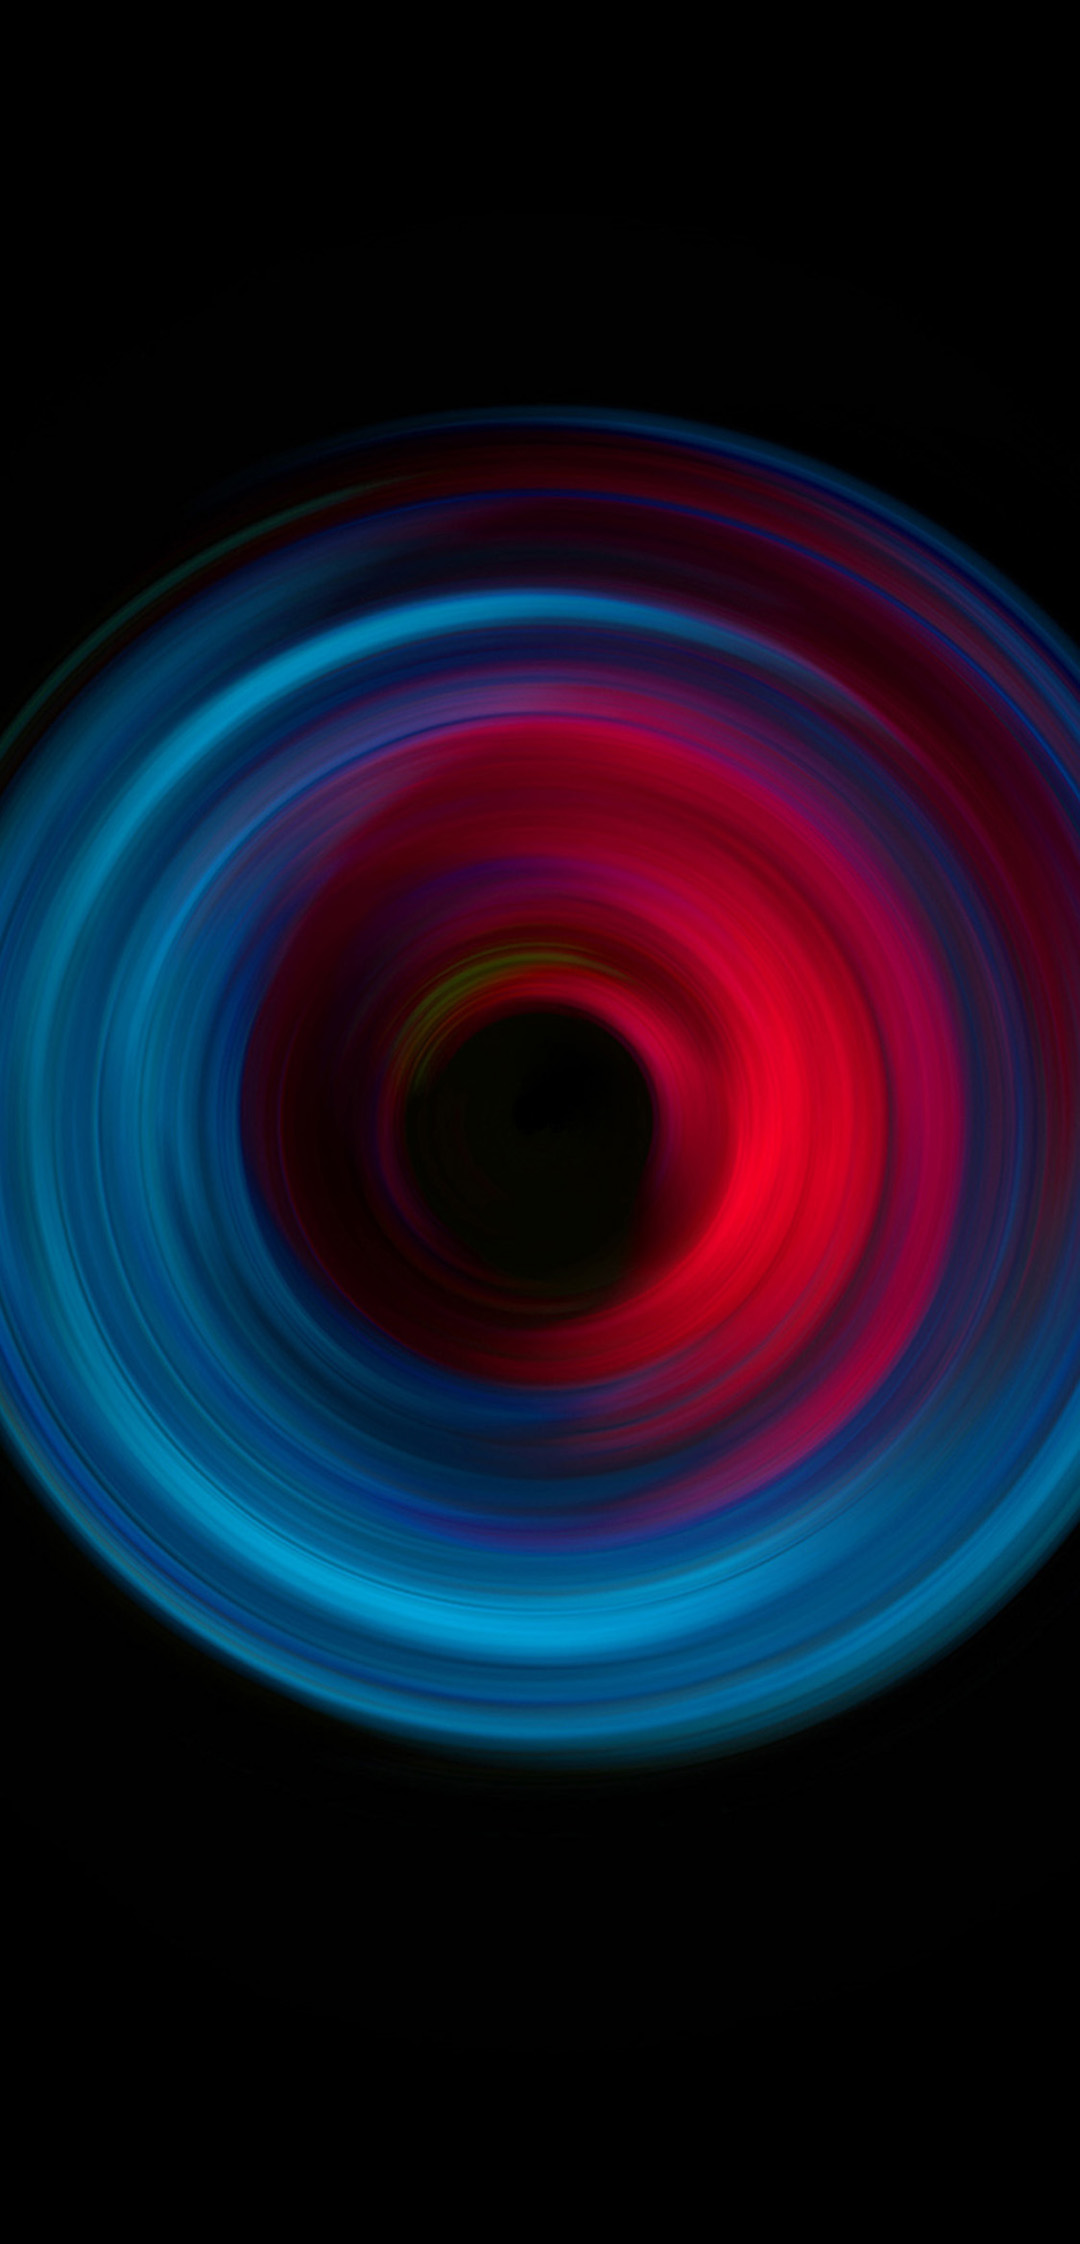 Huawei Mate 20x For Vw77 Circle Dark Blue Red Hazy - Dark Blue Design Background , HD Wallpaper & Backgrounds